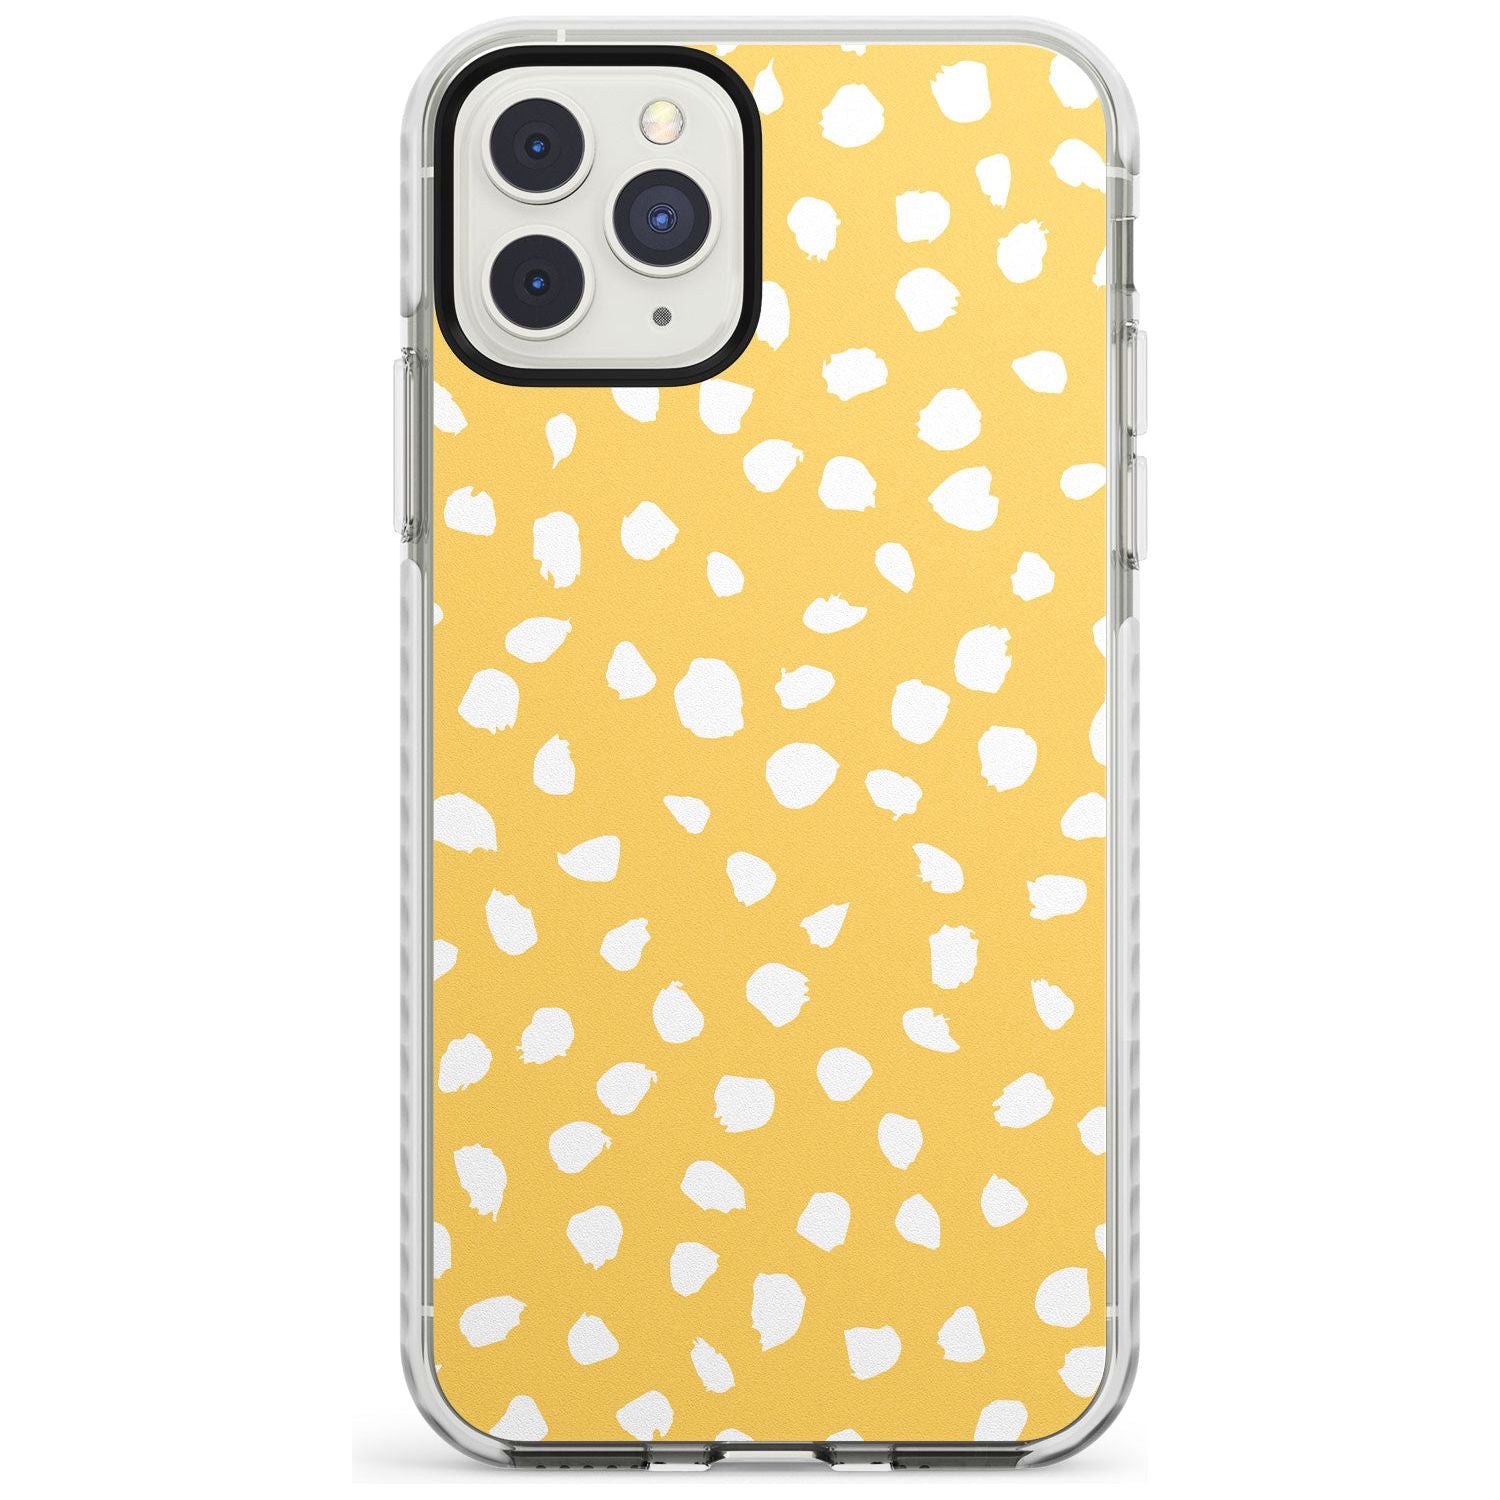 White on Yellow Dalmatian Polka Dot Spots Impact Phone Case for iPhone 11 Pro Max